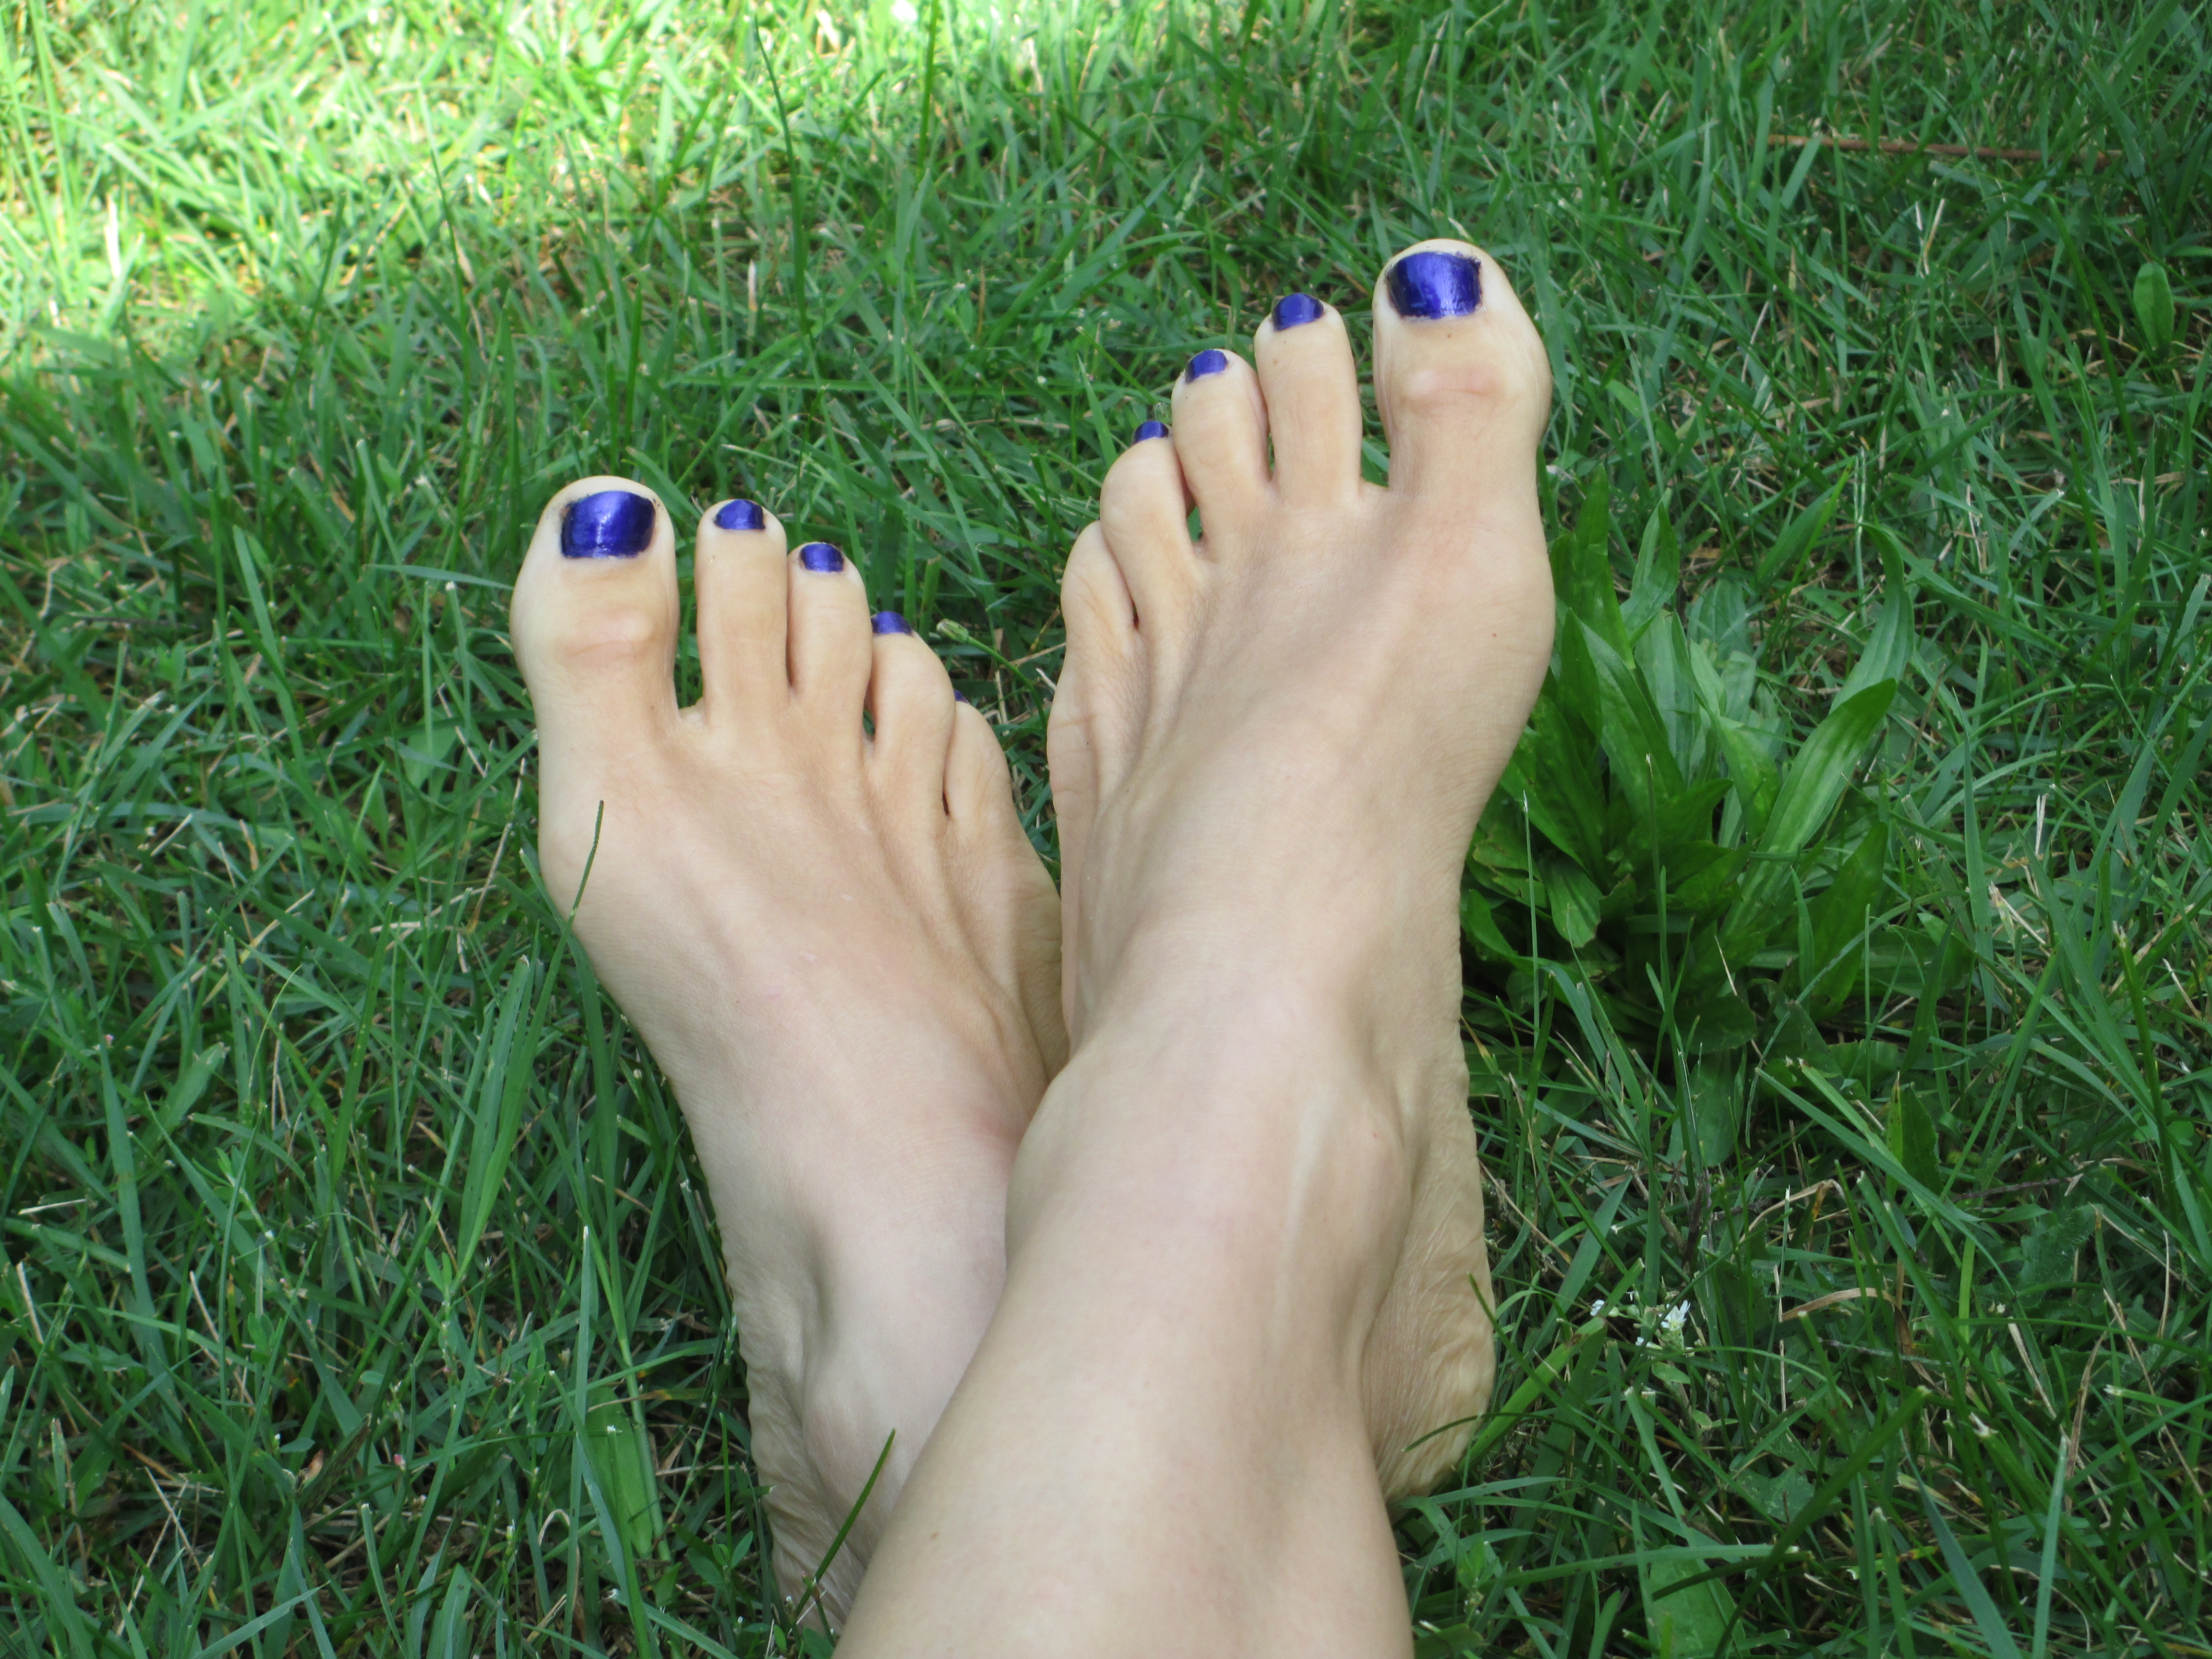 Going Barefoot in Public: How to Have Healthy Feet and Get Kicked ...